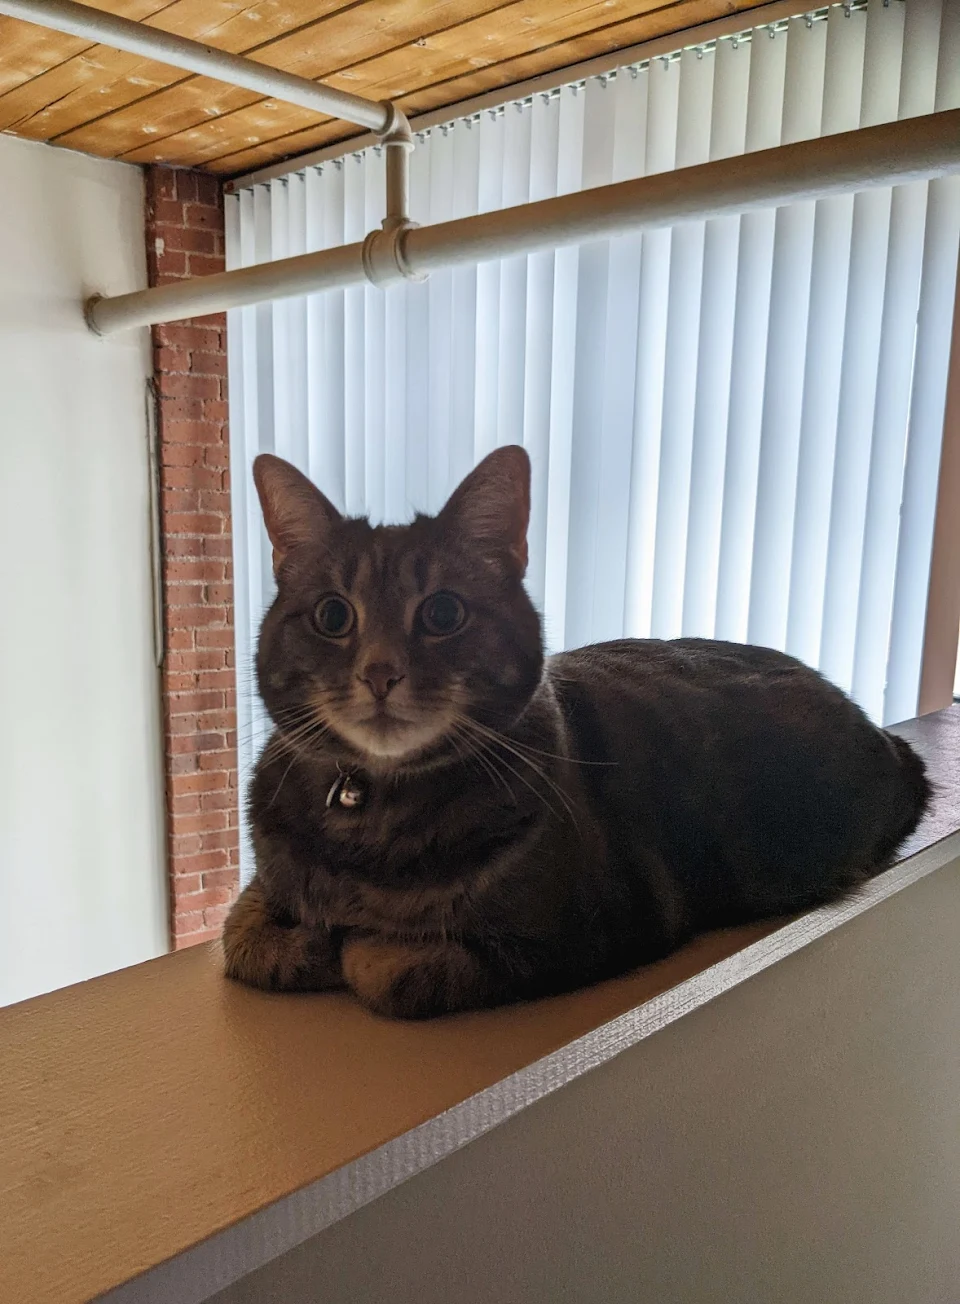 My cat knows he isn't allowed up here, so when I catch him, he loafs perfectly and gives me his best innocent eyes